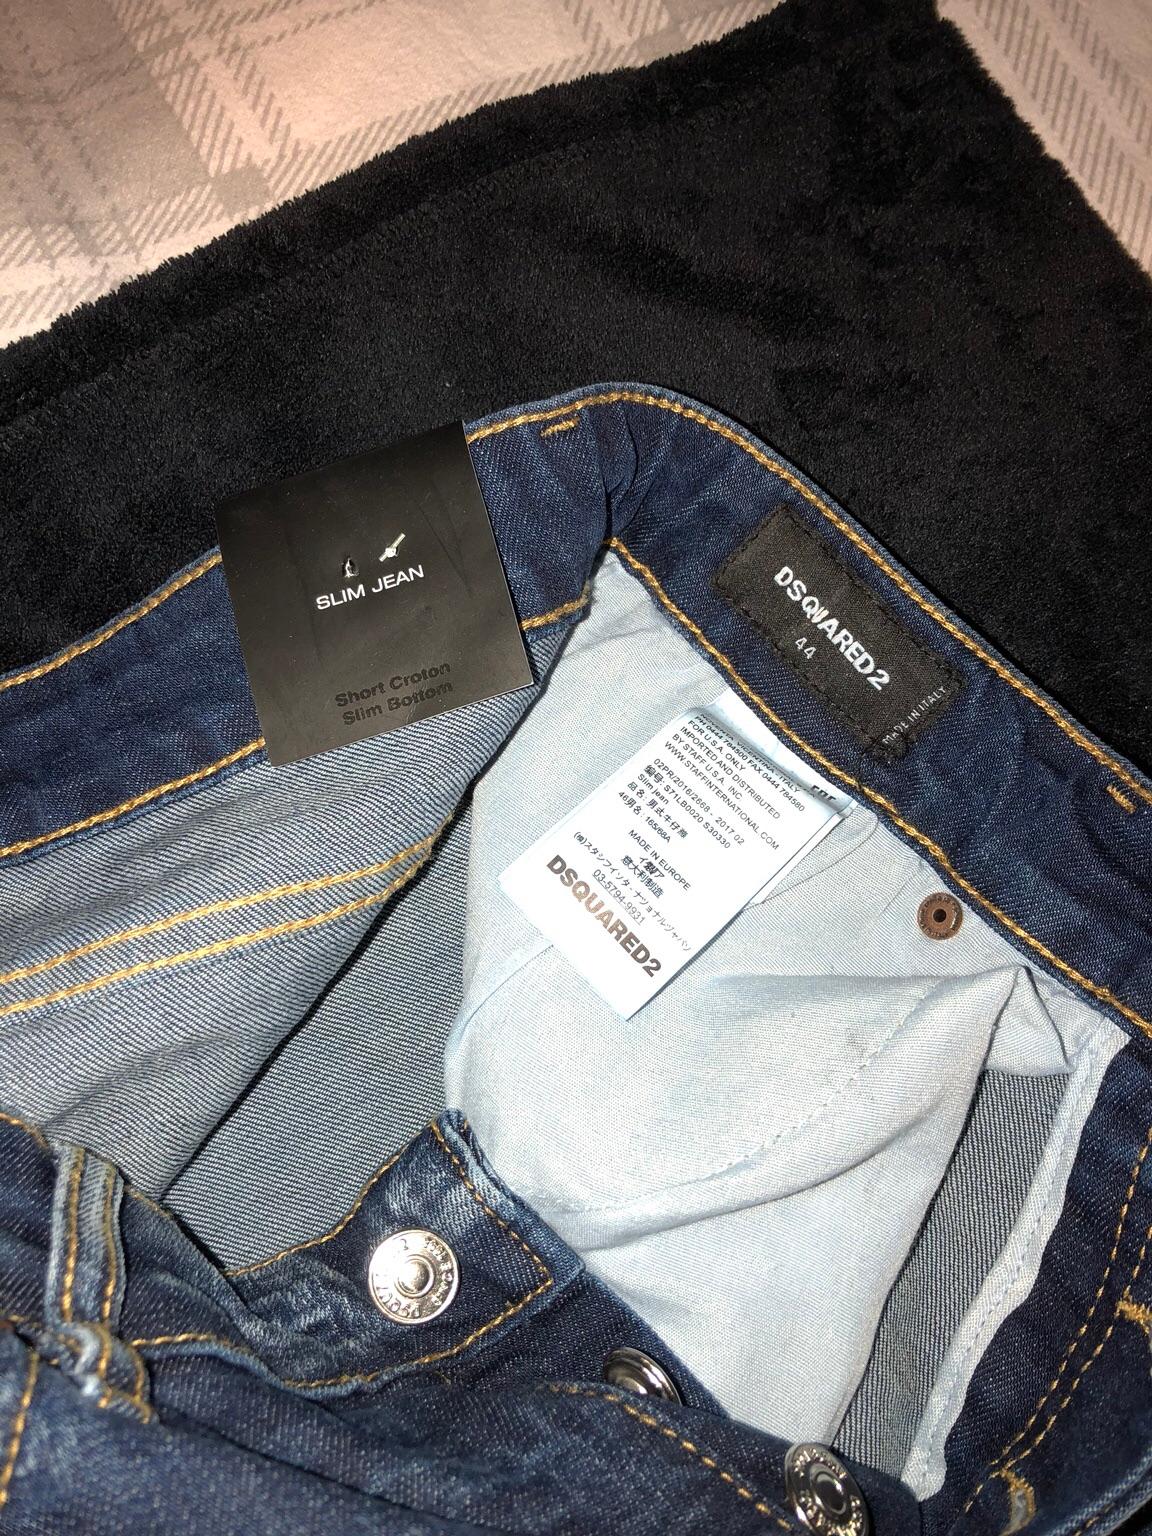 dsquared jeans usa